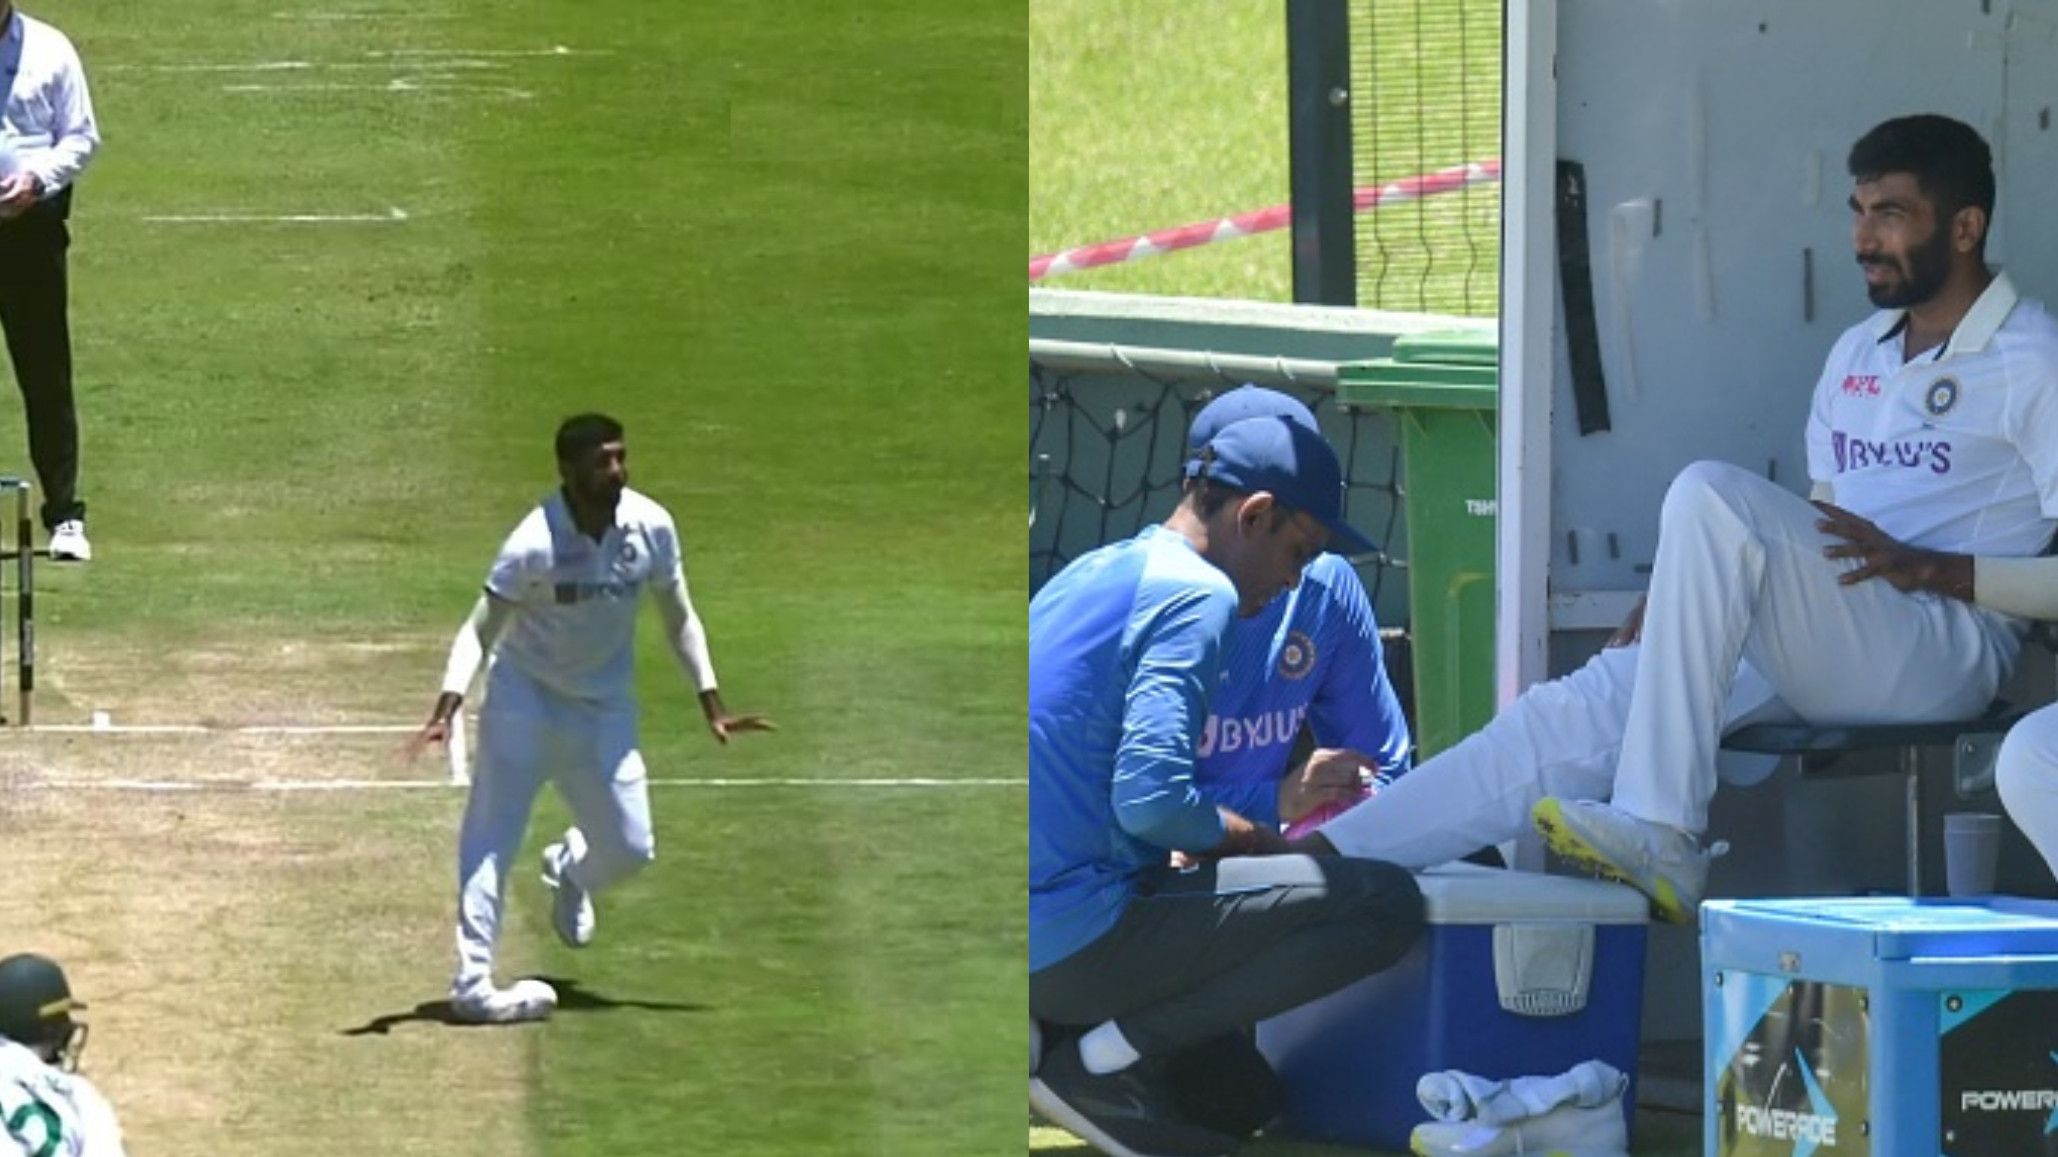 SA v IND 2021-22: WATCH- Jasprit Bumrah twists his ankle on follow-through; BCCI provides update on injury